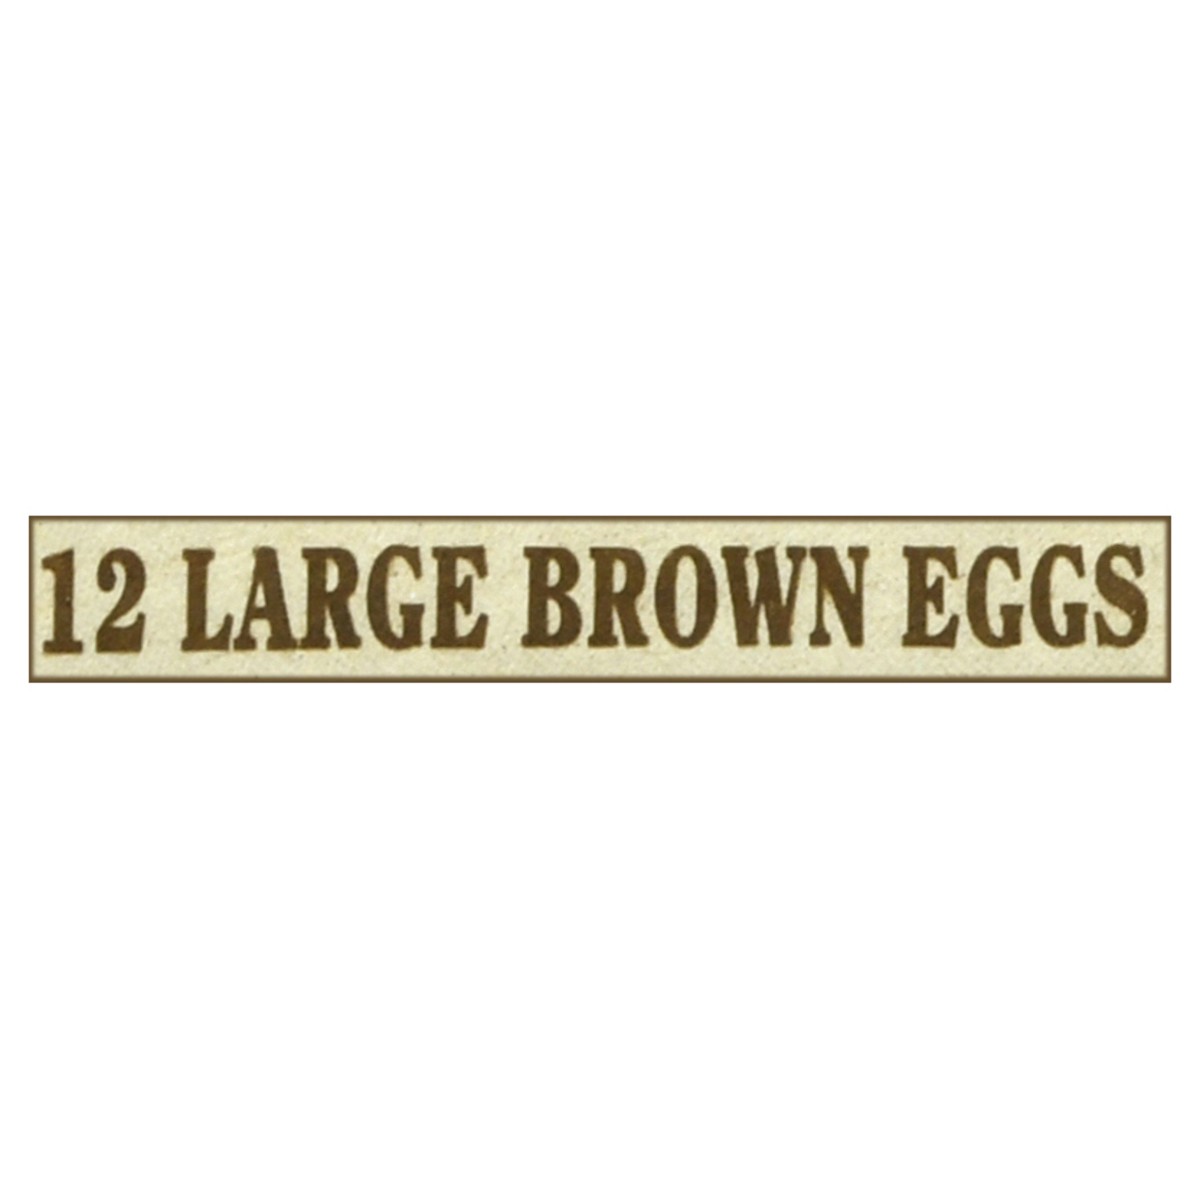 slide 9 of 13, Farmhouse Eggs Large Cage Free Brown Eggs 12 ea, 12 ct